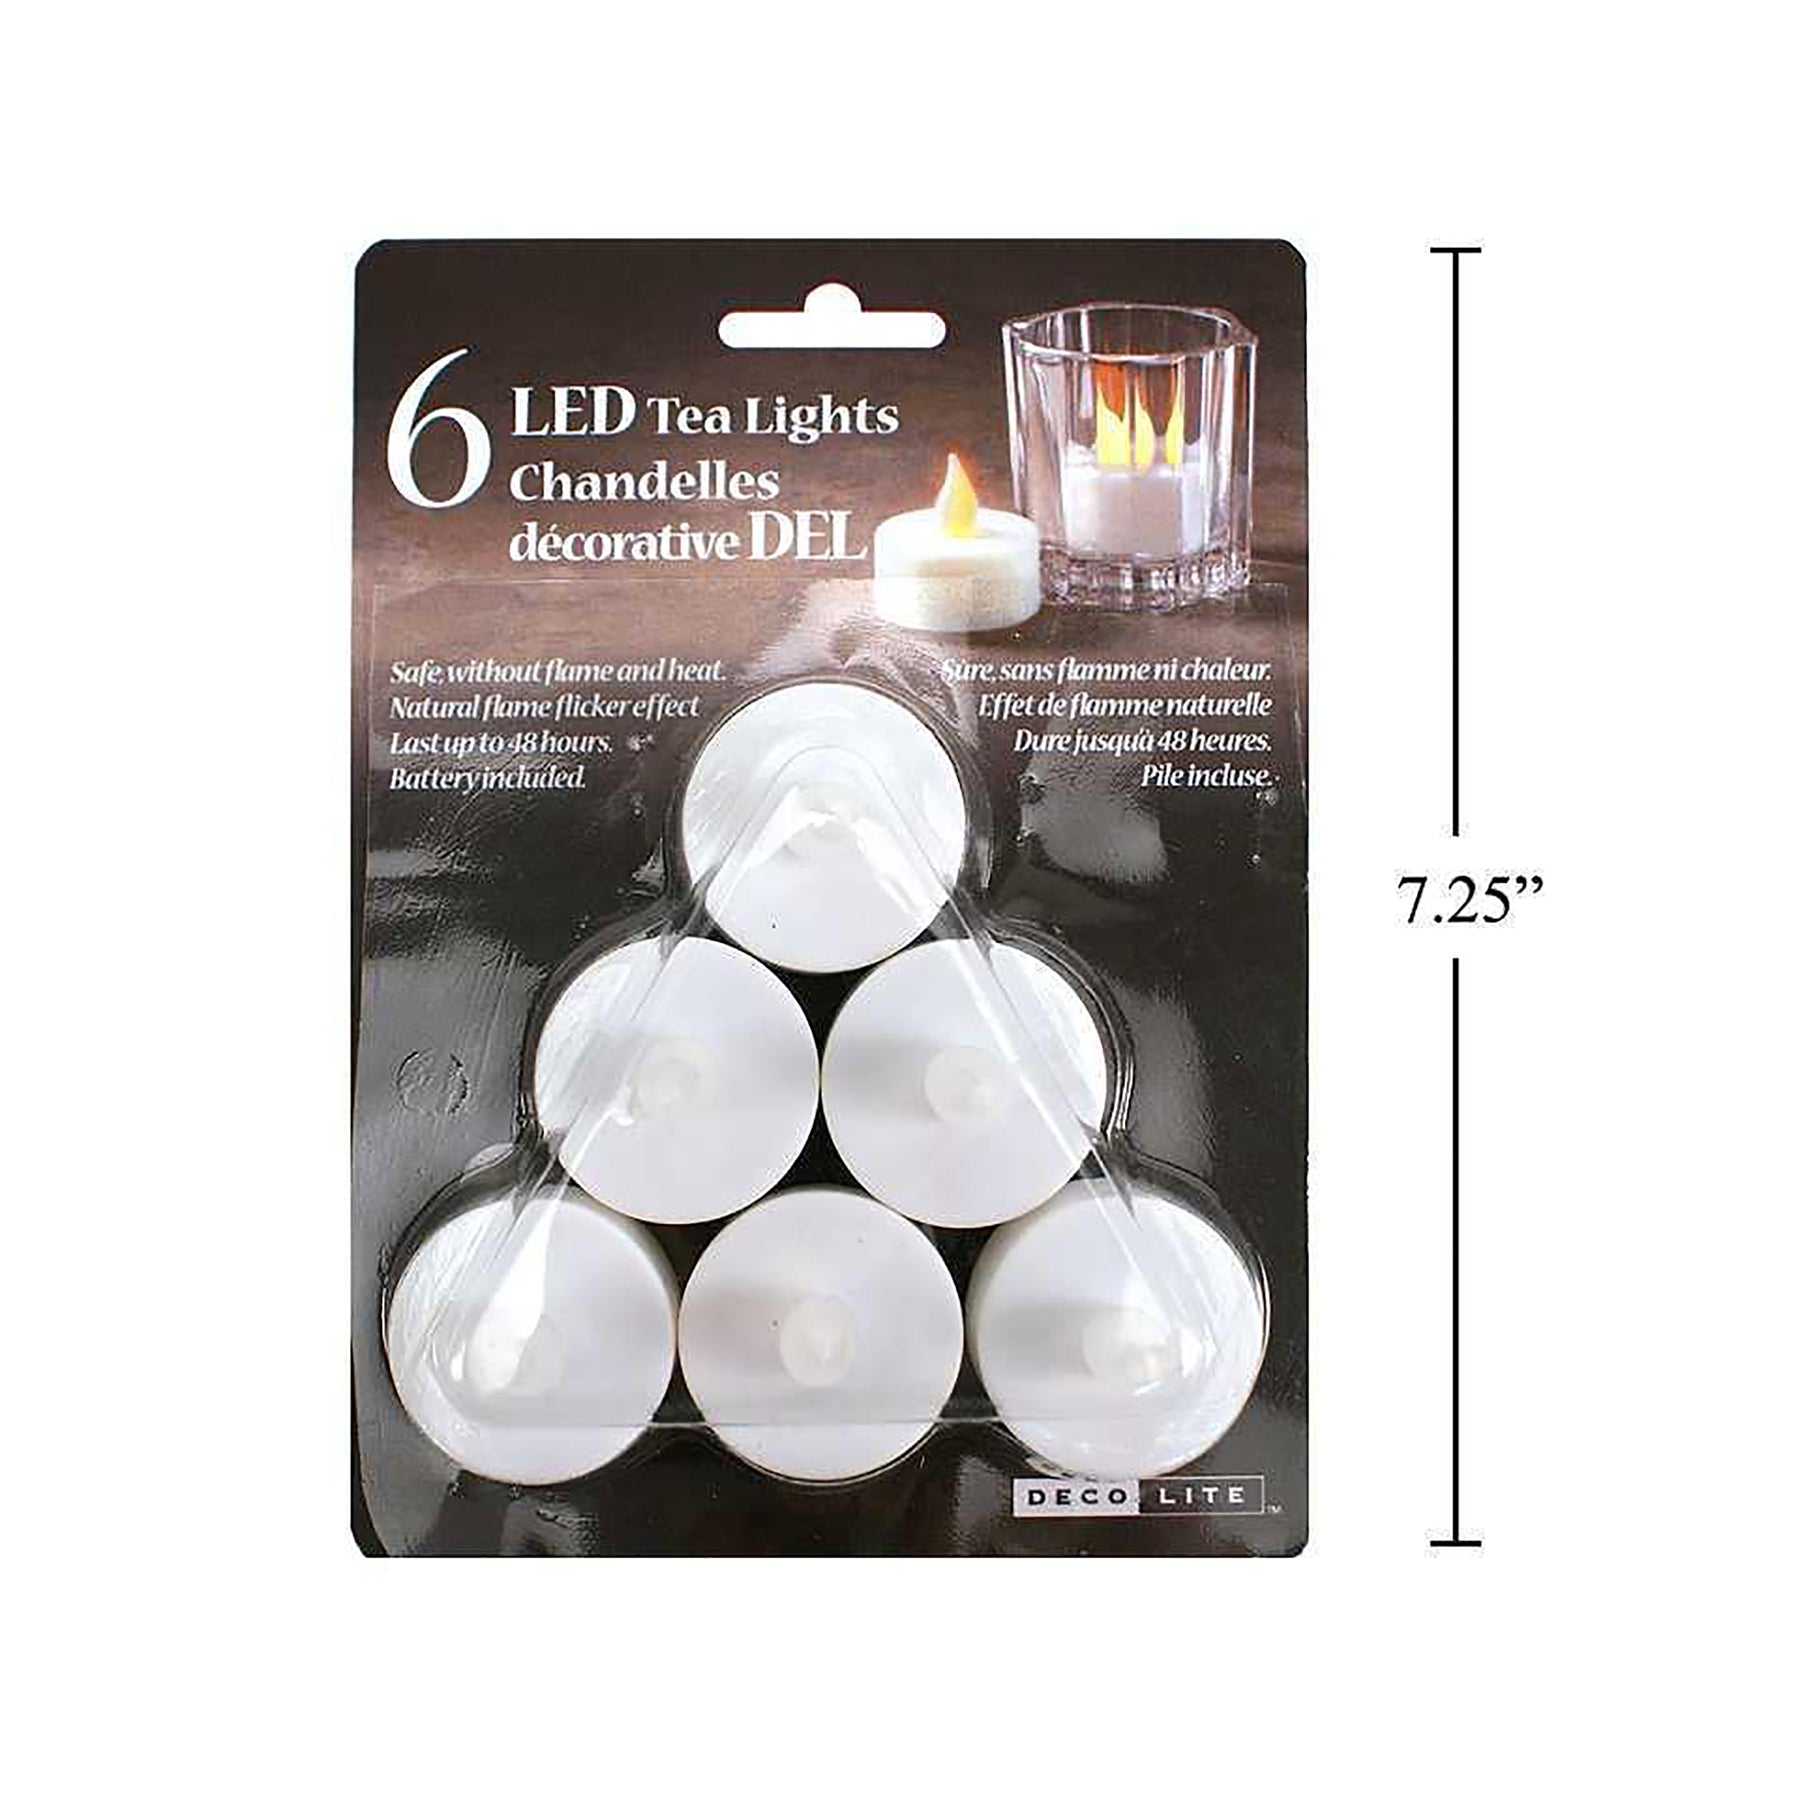 Deco Lite 6 LED Tealights Flickering Batteries Included 1.5x1.4in each